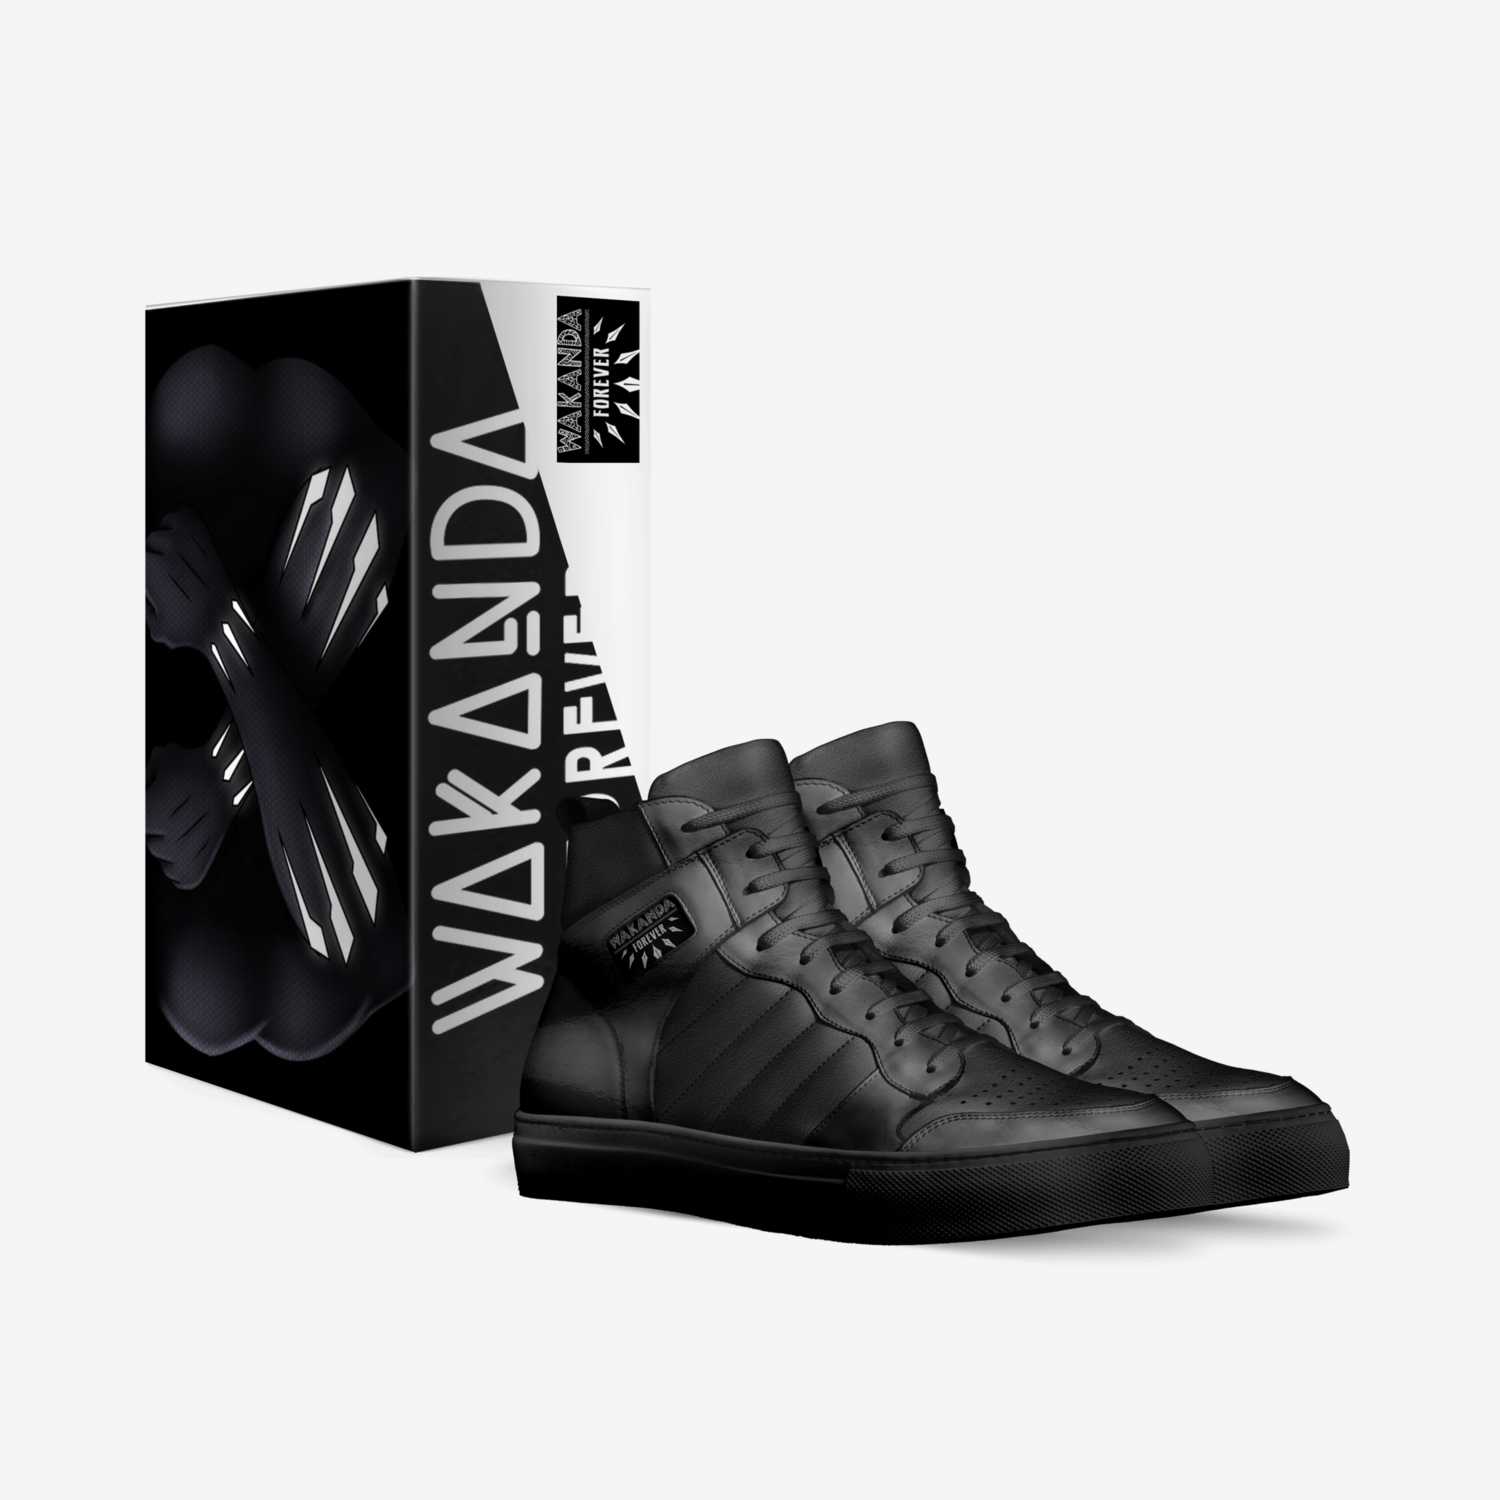 Wakanda Forever custom made in Italy shoes by Shawn Mcnair | Box view